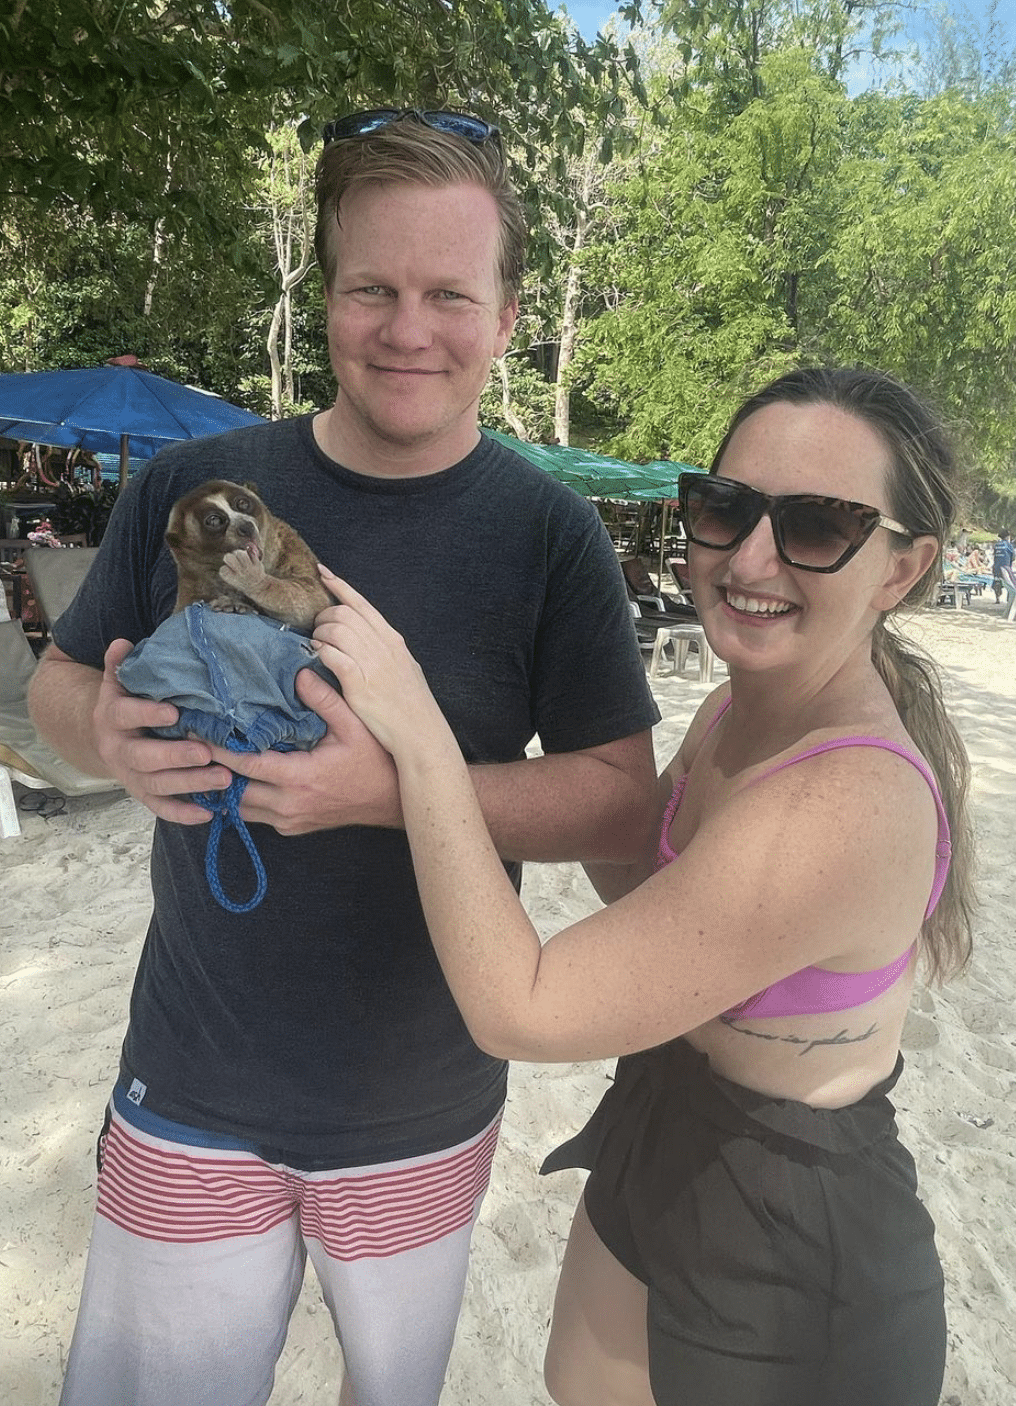 man and woman stand together on beach while man holds some sort of lemur